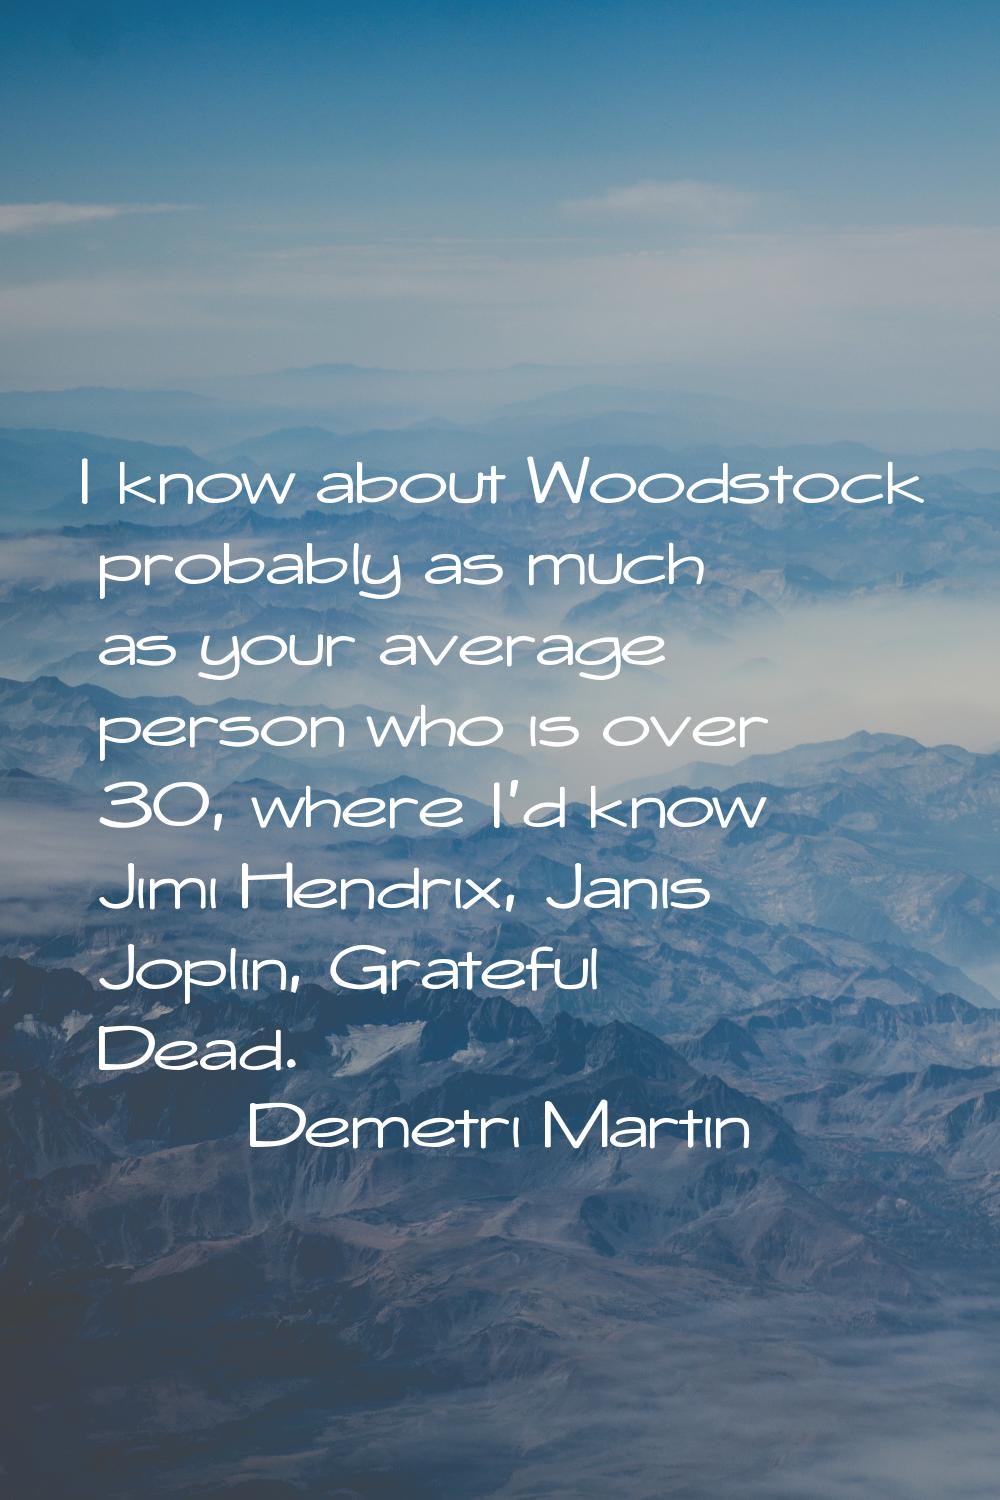 I know about Woodstock probably as much as your average person who is over 30, where I'd know Jimi 